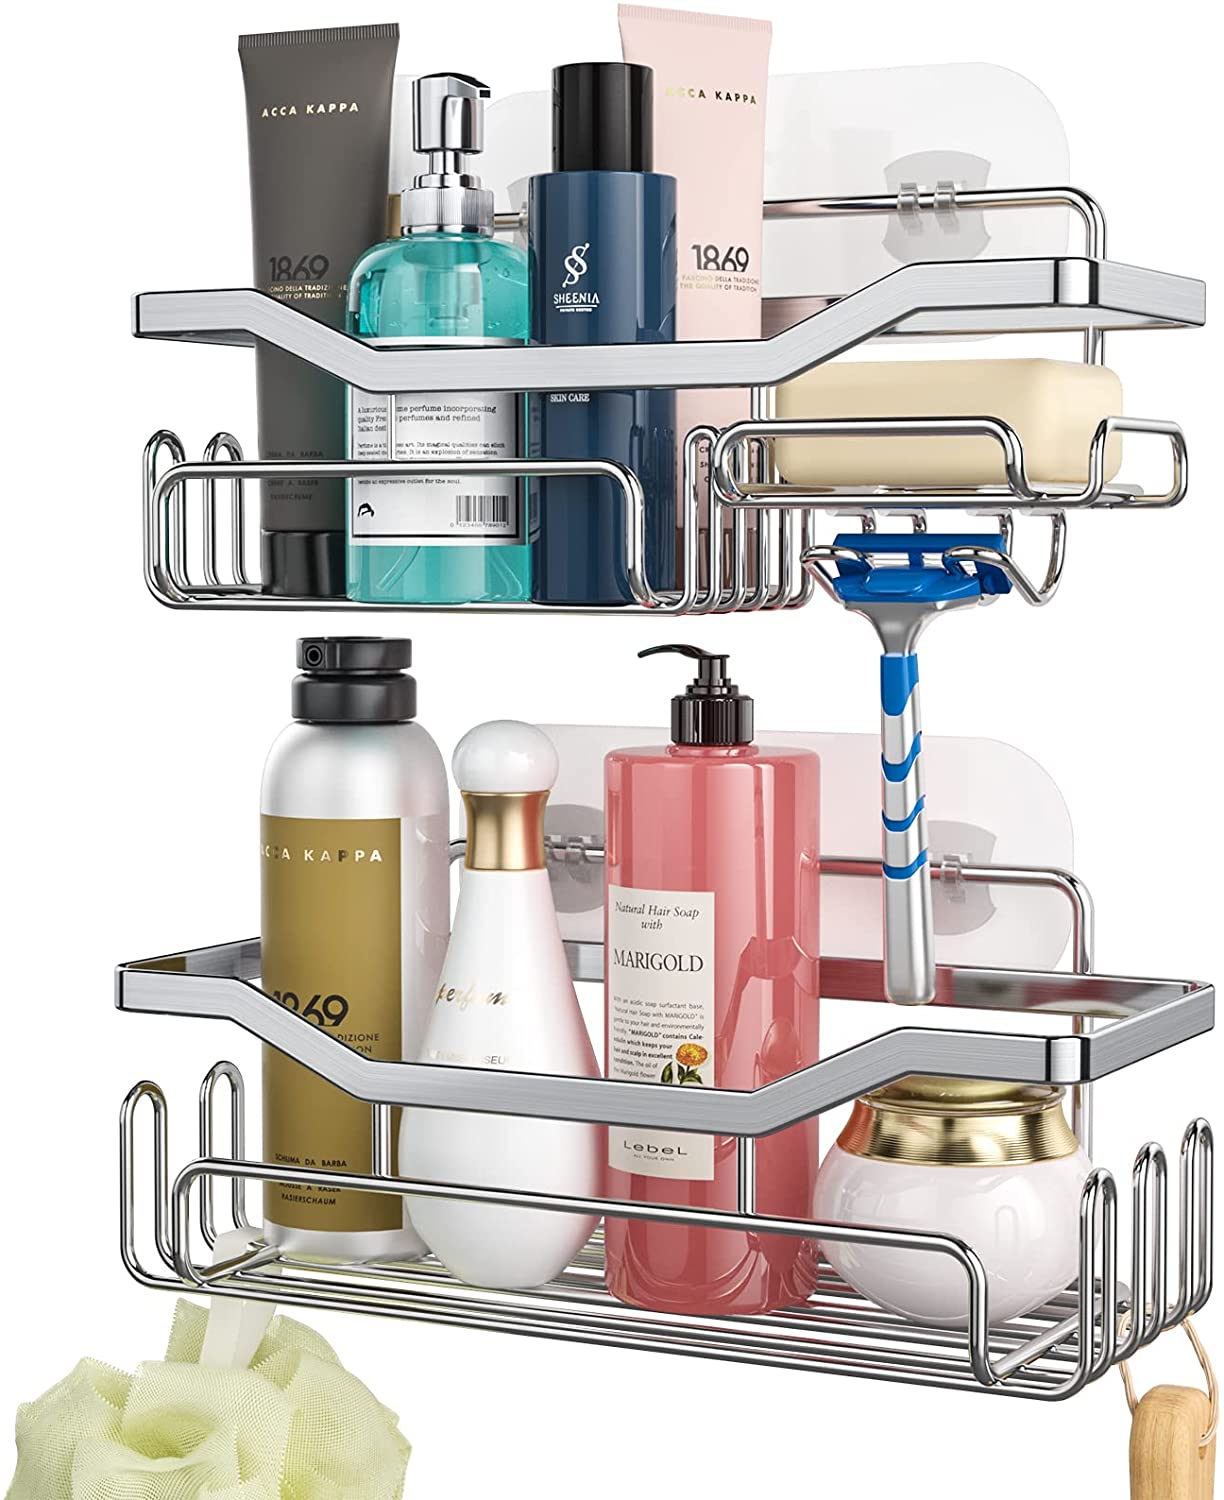 HapiRm Adhesive Shower Caddy Shower Organizer Shelf Build in Shampoo Holder,  No Drilling Rust Proof Stainless Steel Shower Storage Rack with 11 Hooks  for Hanging Shower Ball and Razor